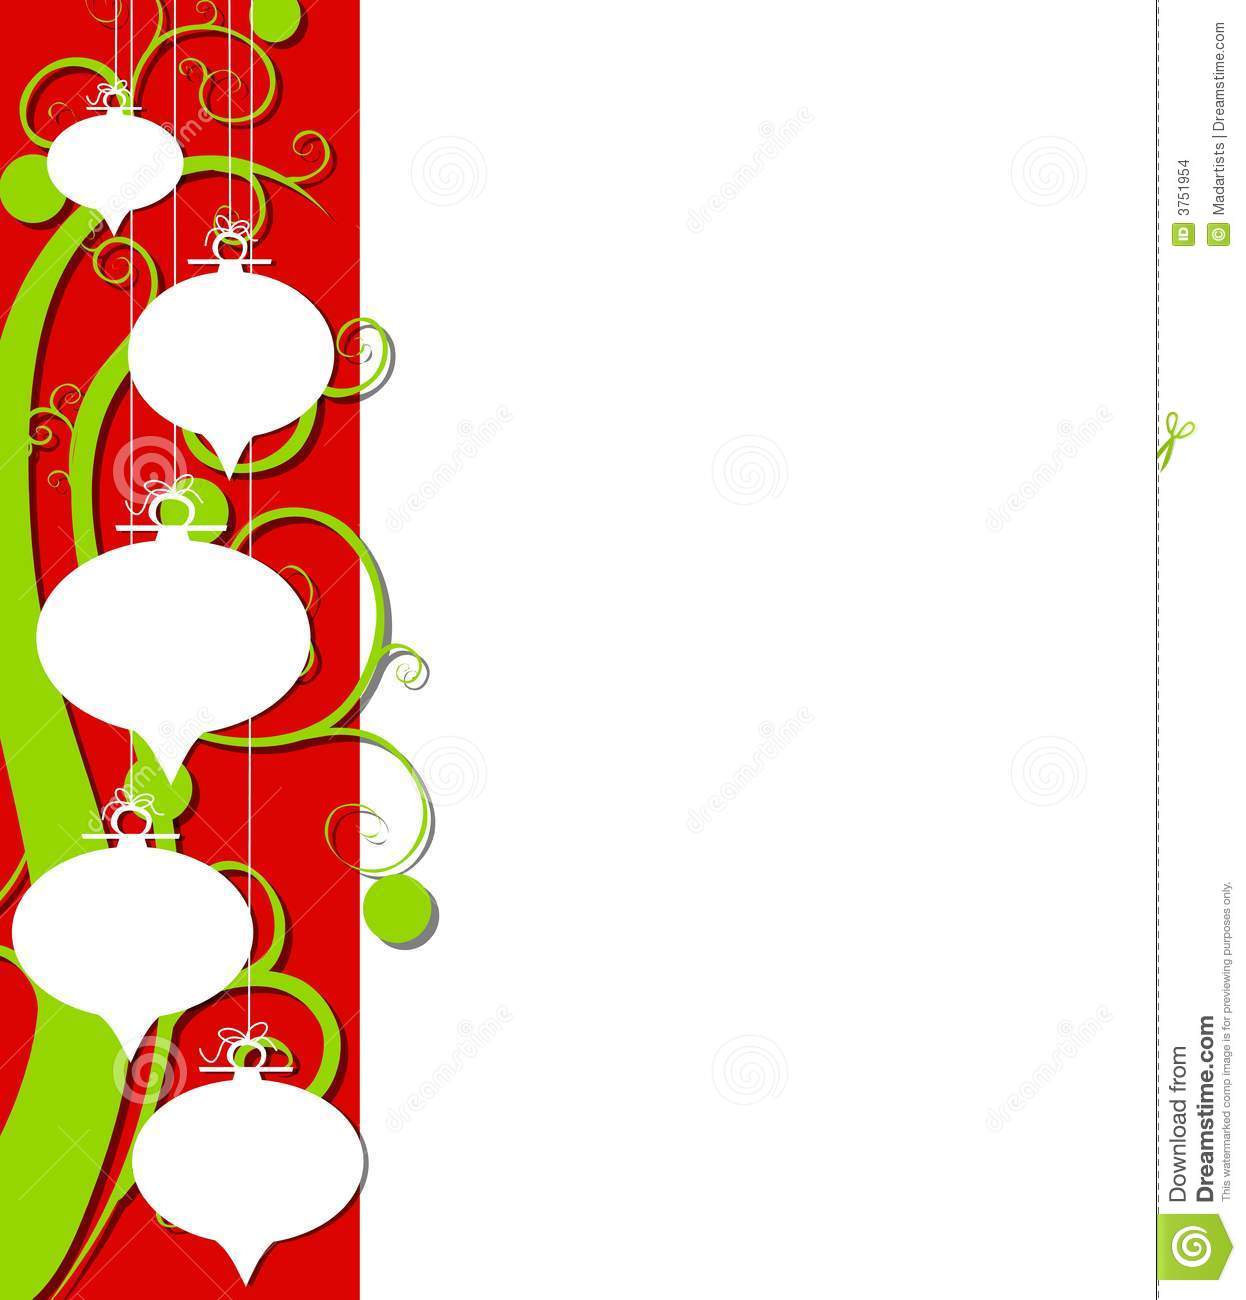 free microsoft word borders download holiday